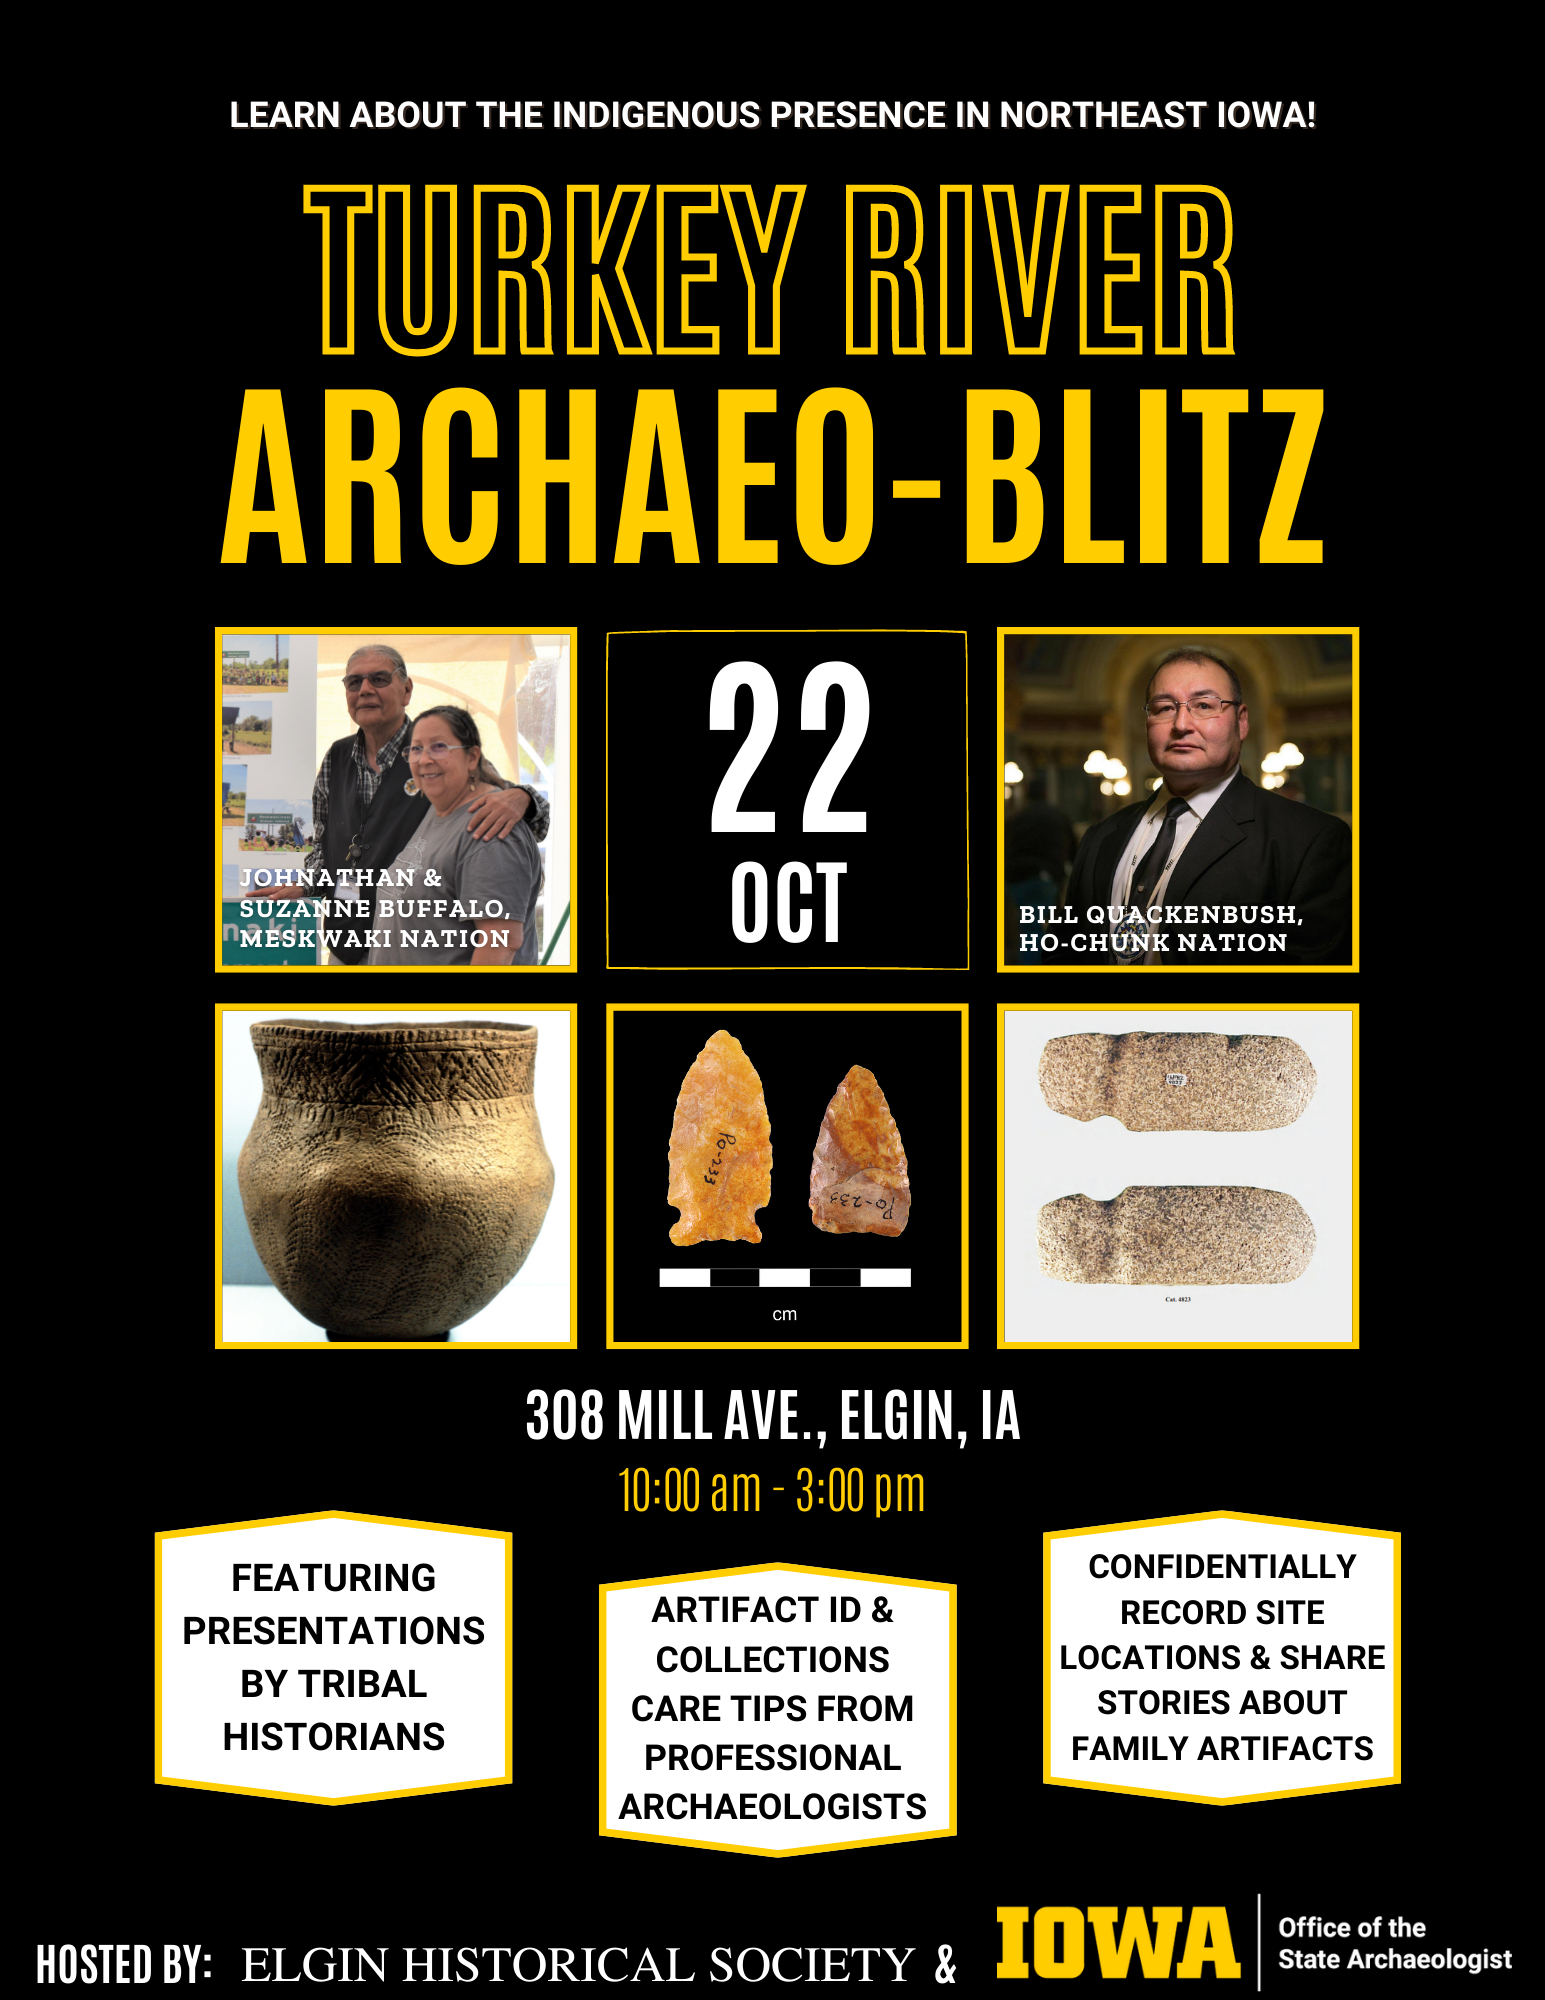 event flyer showing photos of the featured speakers and samples of archaeological artifacts